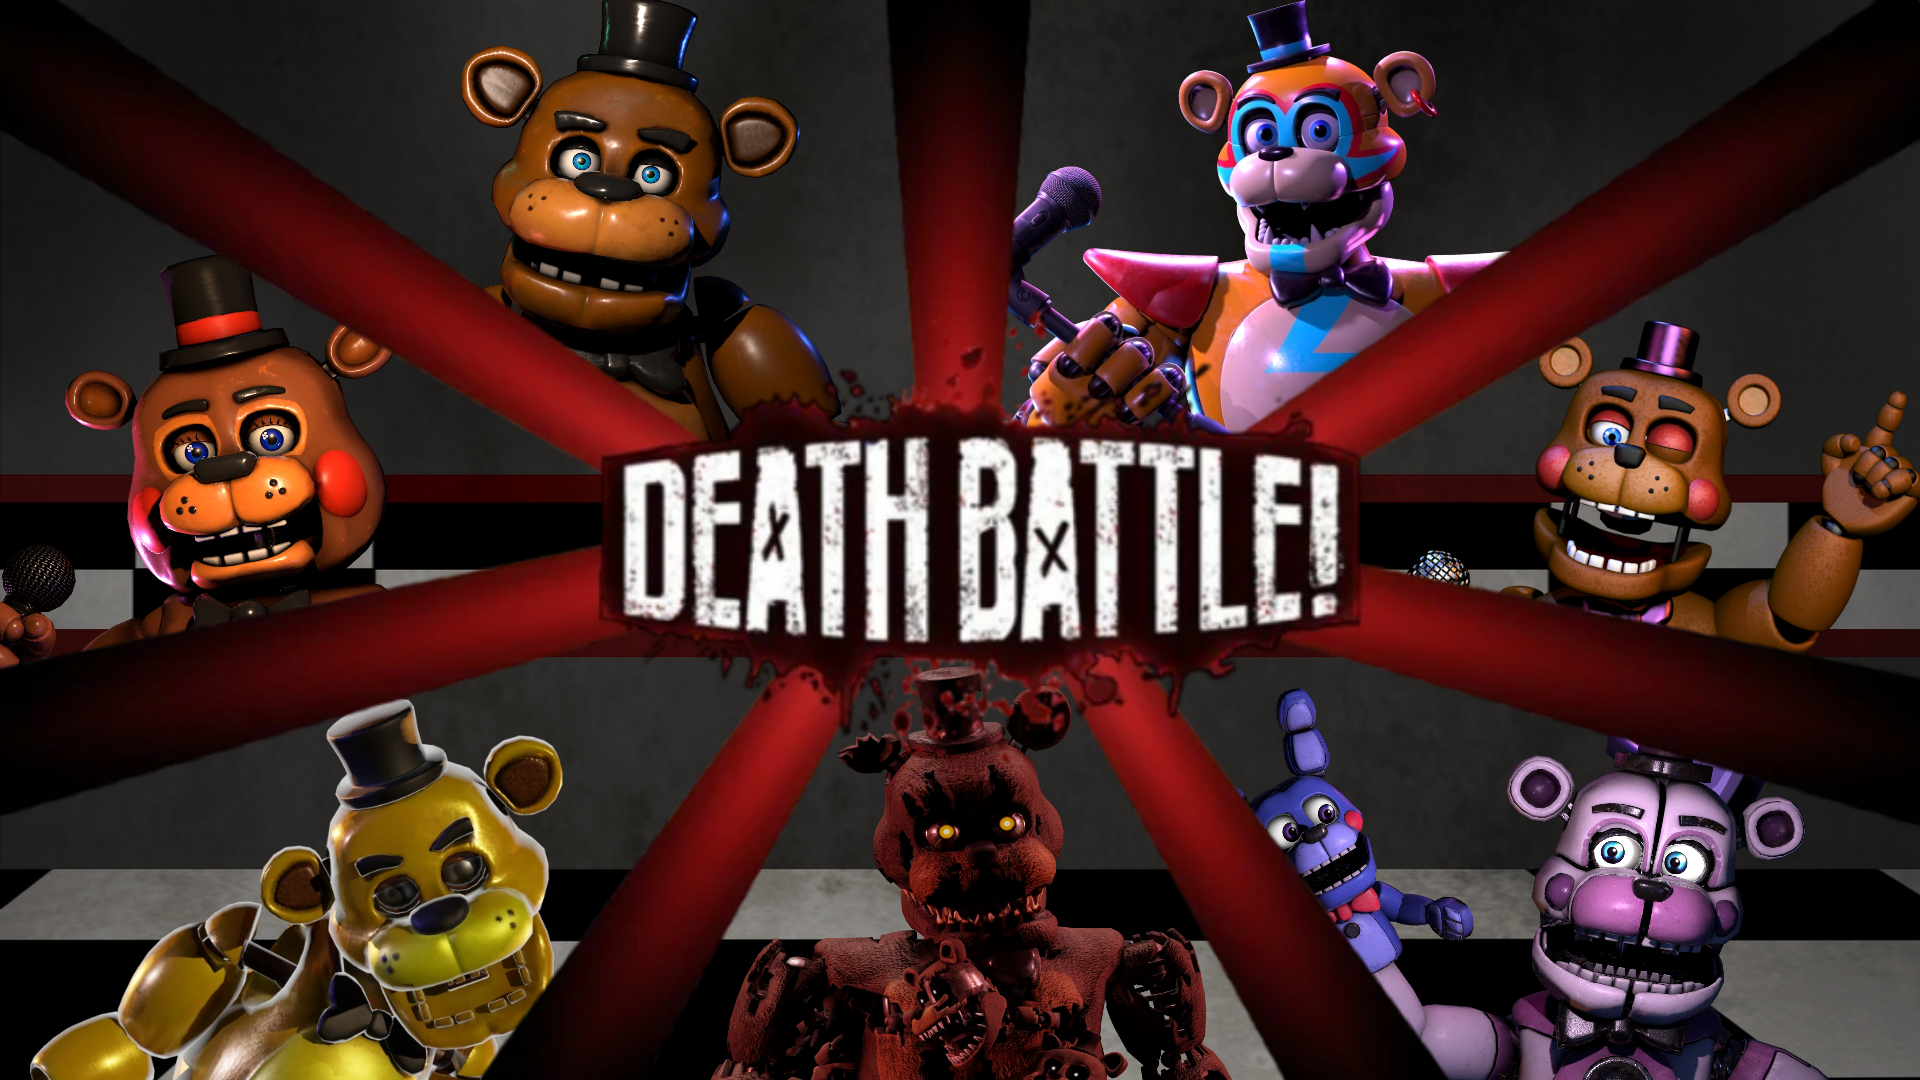 Five Nights at Freddy's 1: Playable Animatronics  Play As The Fazbear Band  And Defeat The Guard! 